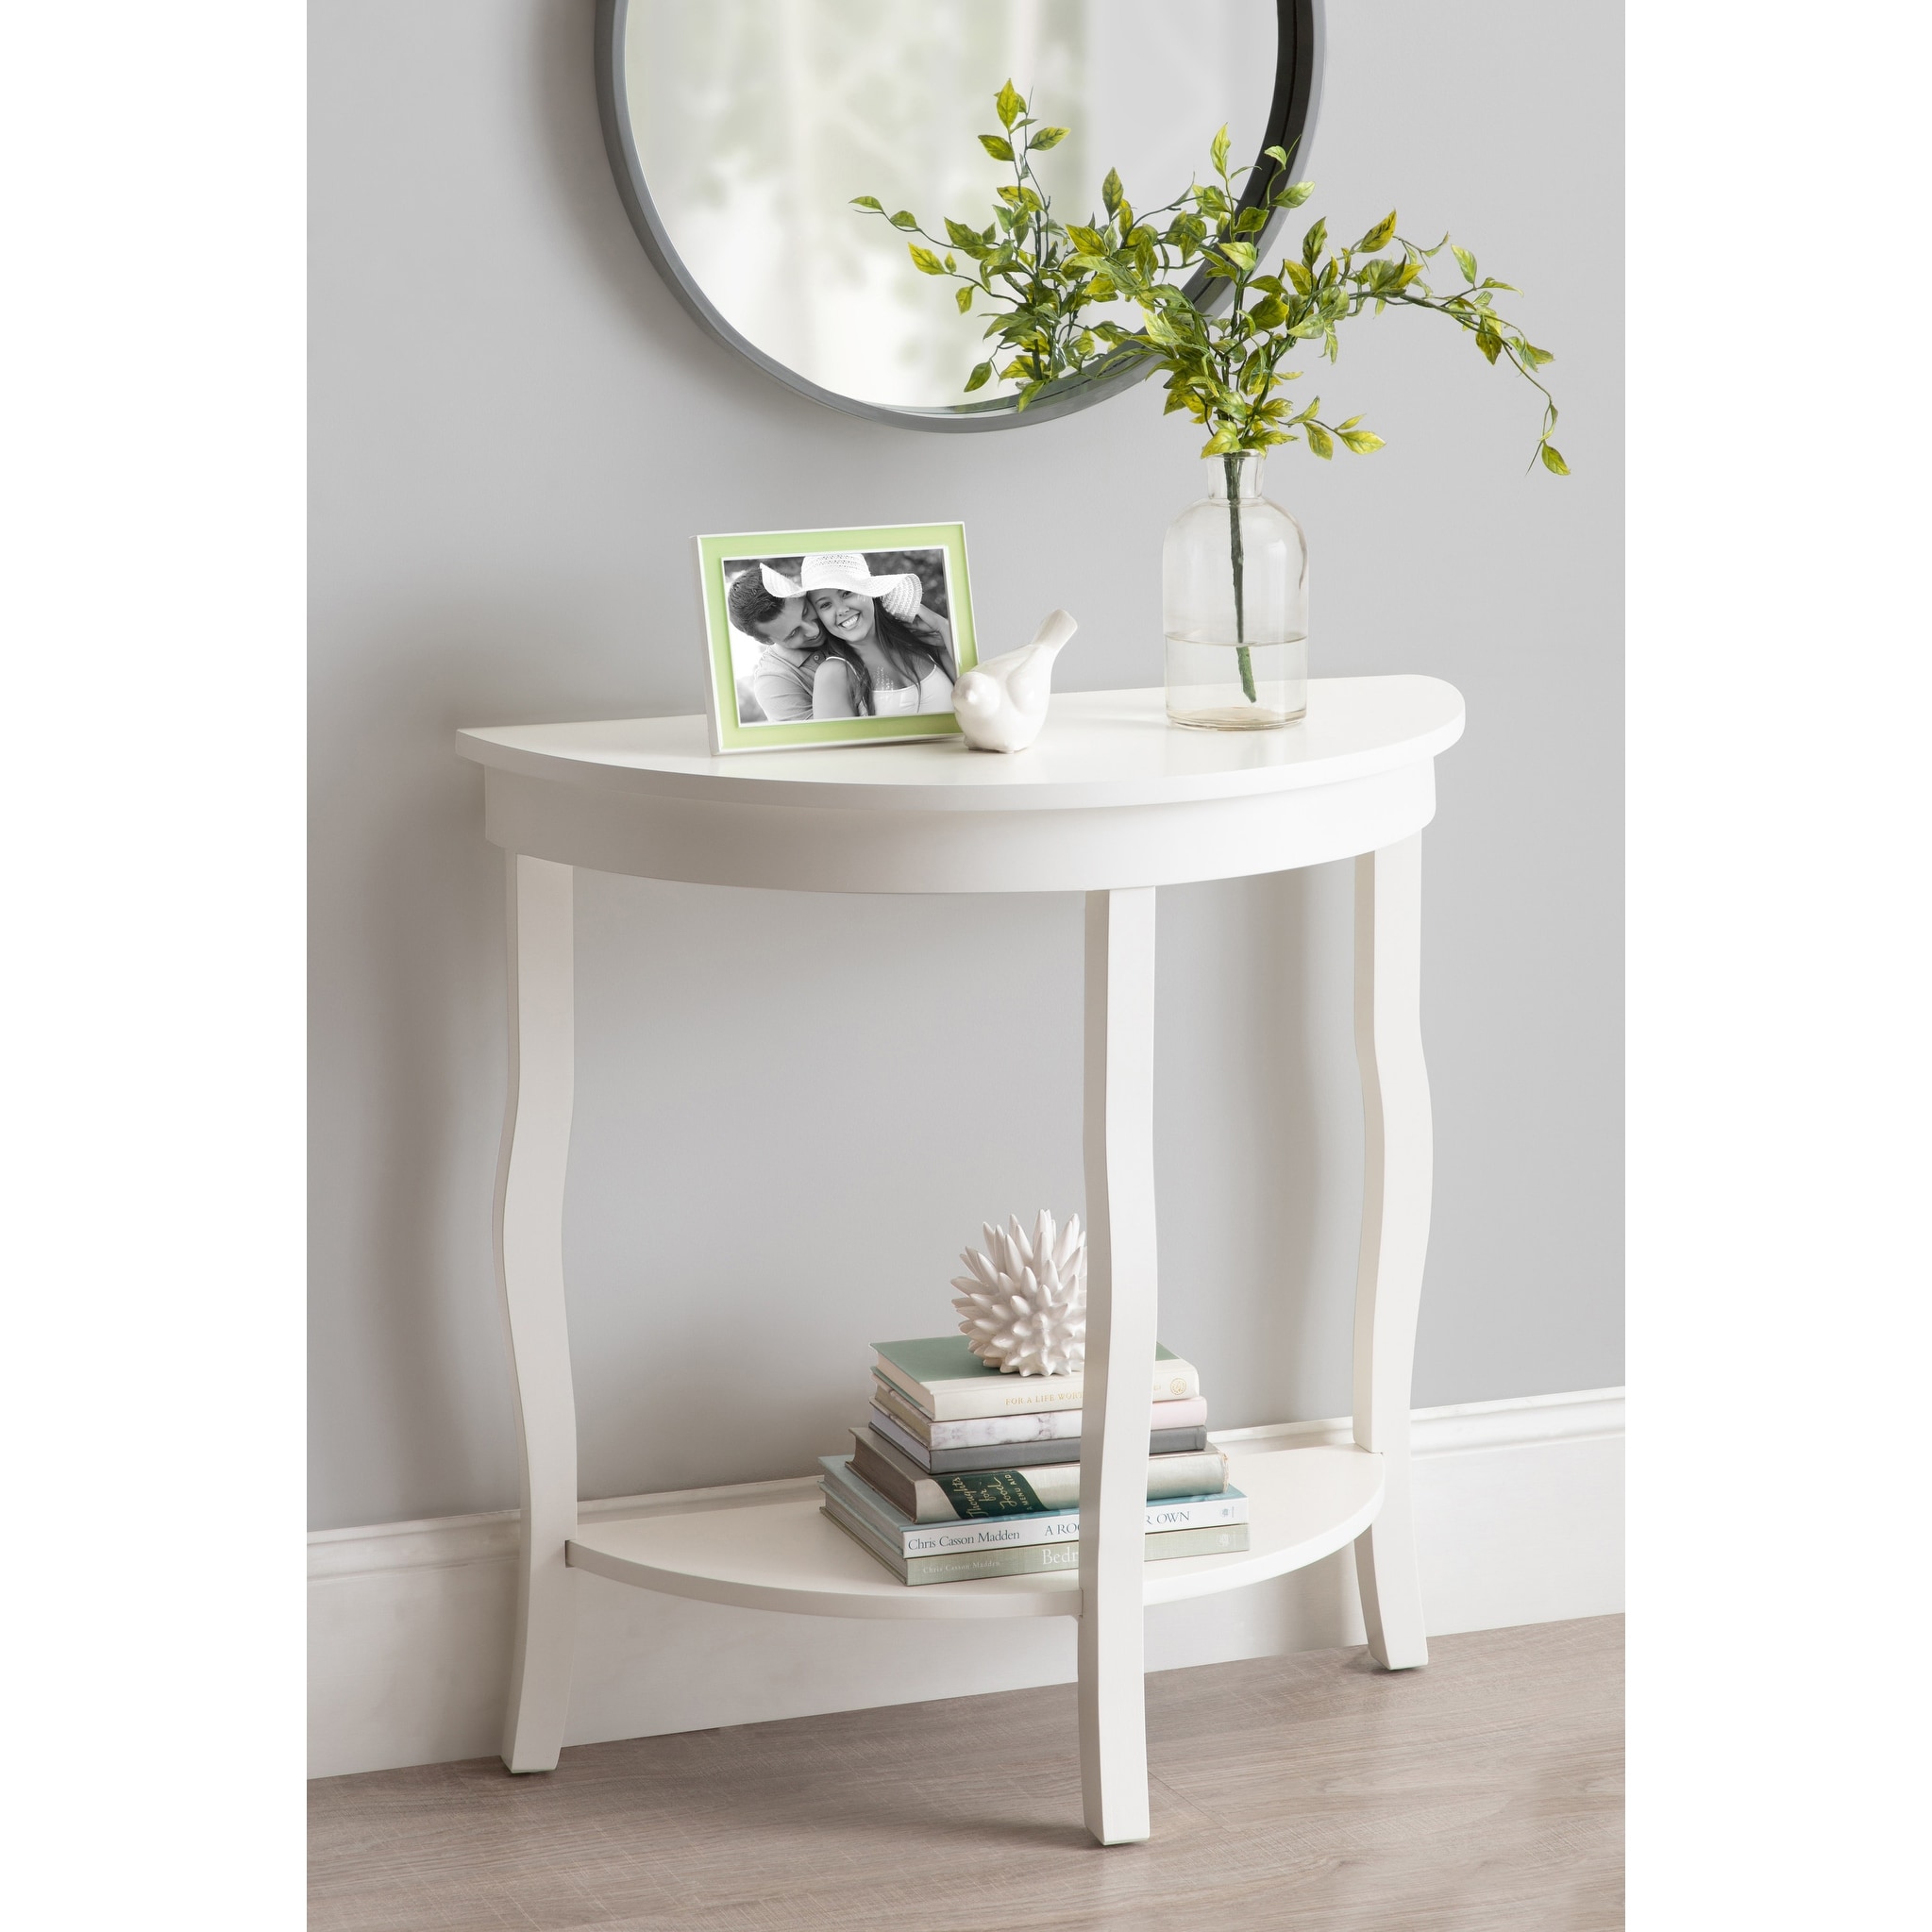 Black Kate and Laurel Lillian Wood Half Moon Console Table Curved Legs with Shelf